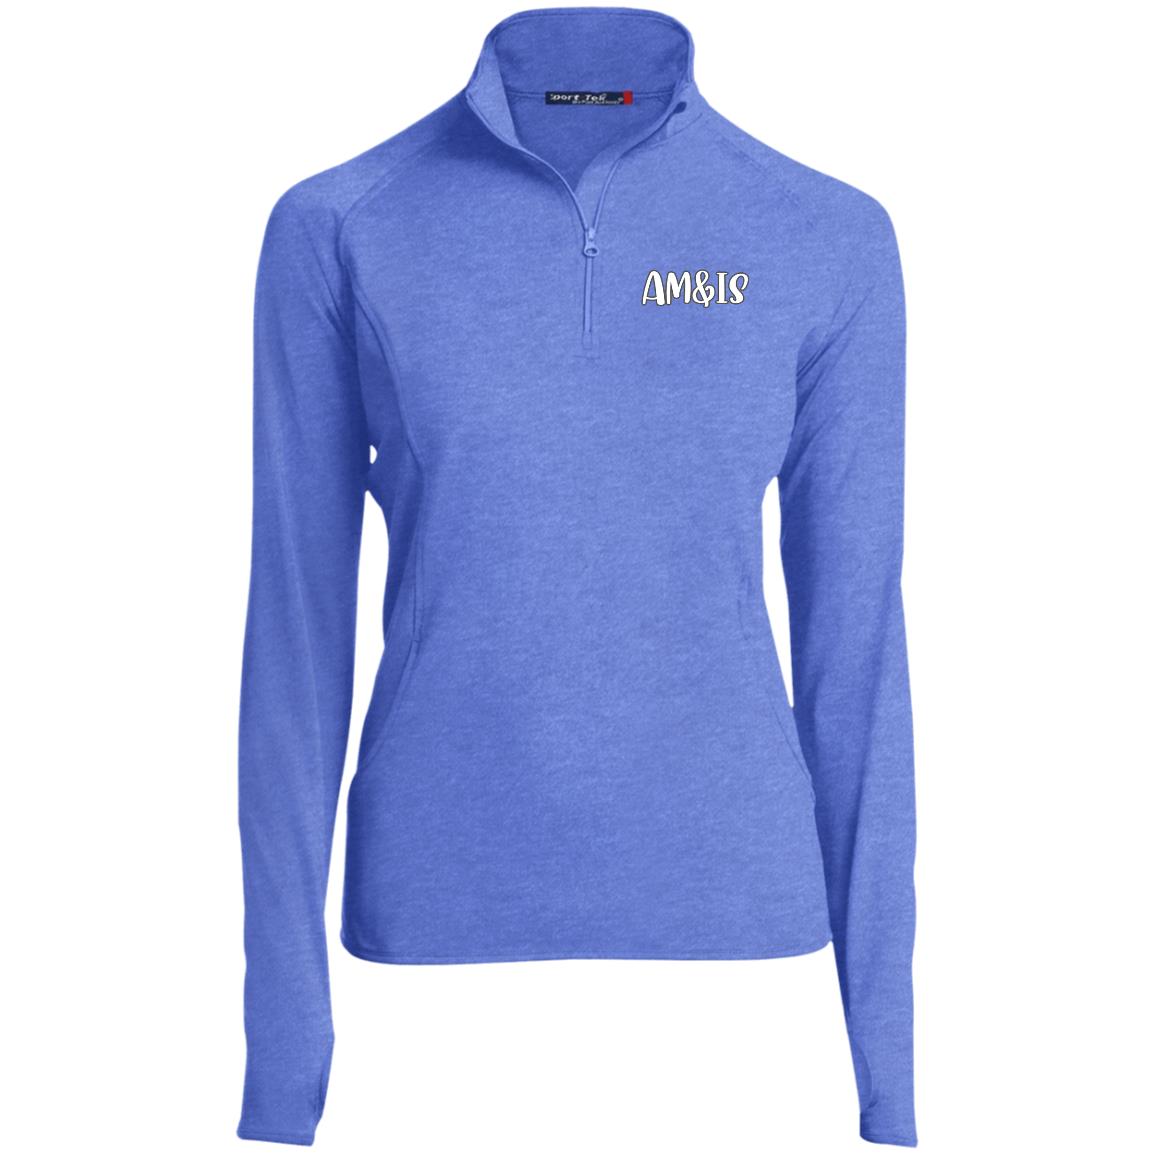 TRUE ROYAL HEATHER - AM&IS Activewear Ladies' 1/2 Zip Performance Pullover - womens shirt at TFC&H Co.